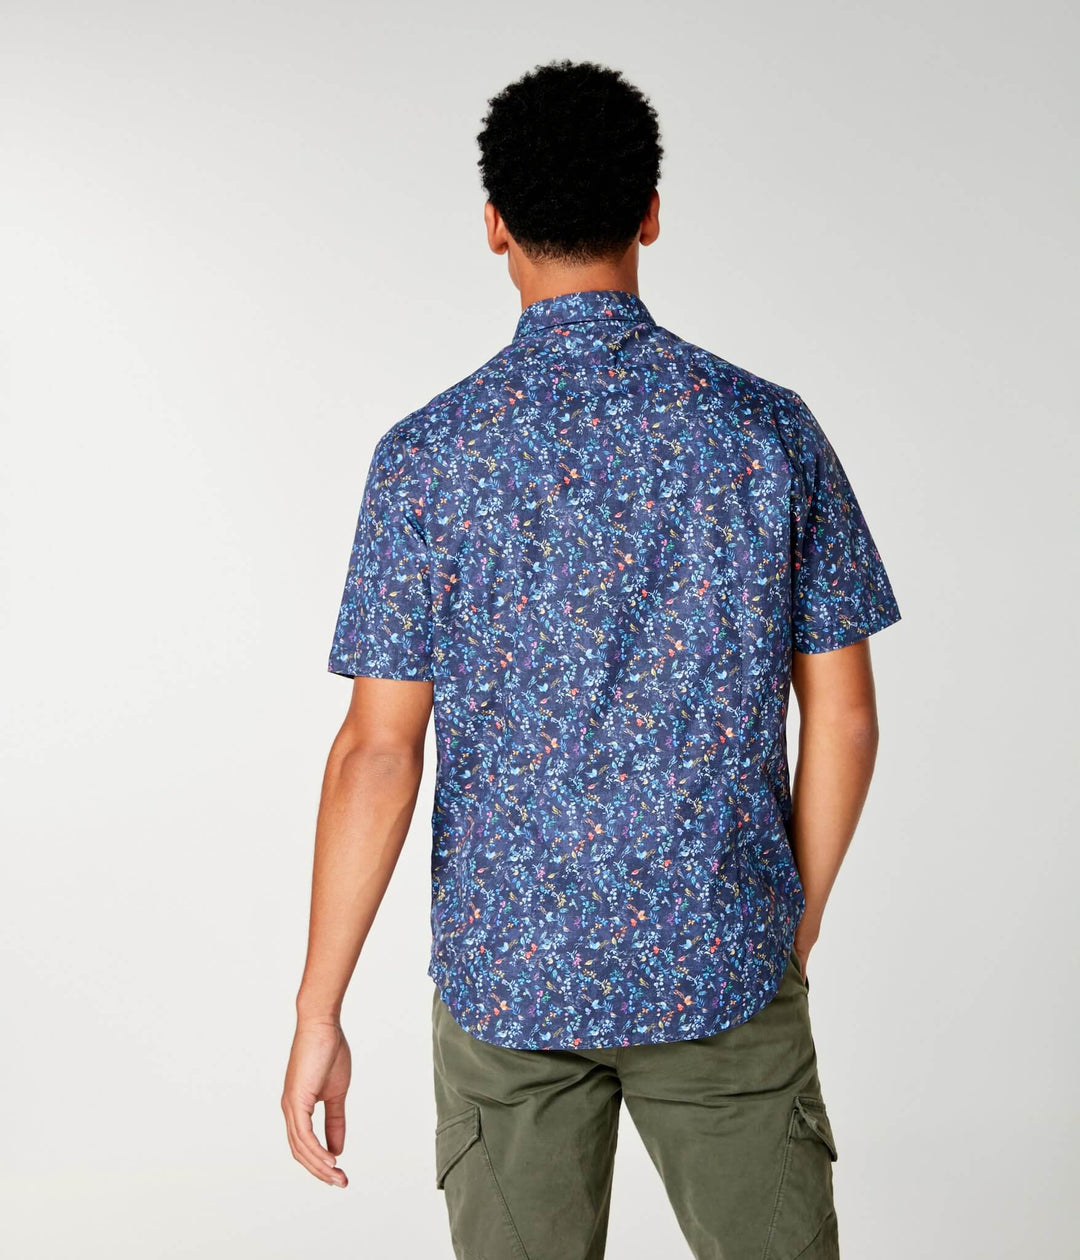 Good Man | Woven On-Point Shirt | Navy Blue Jay Vine Floral